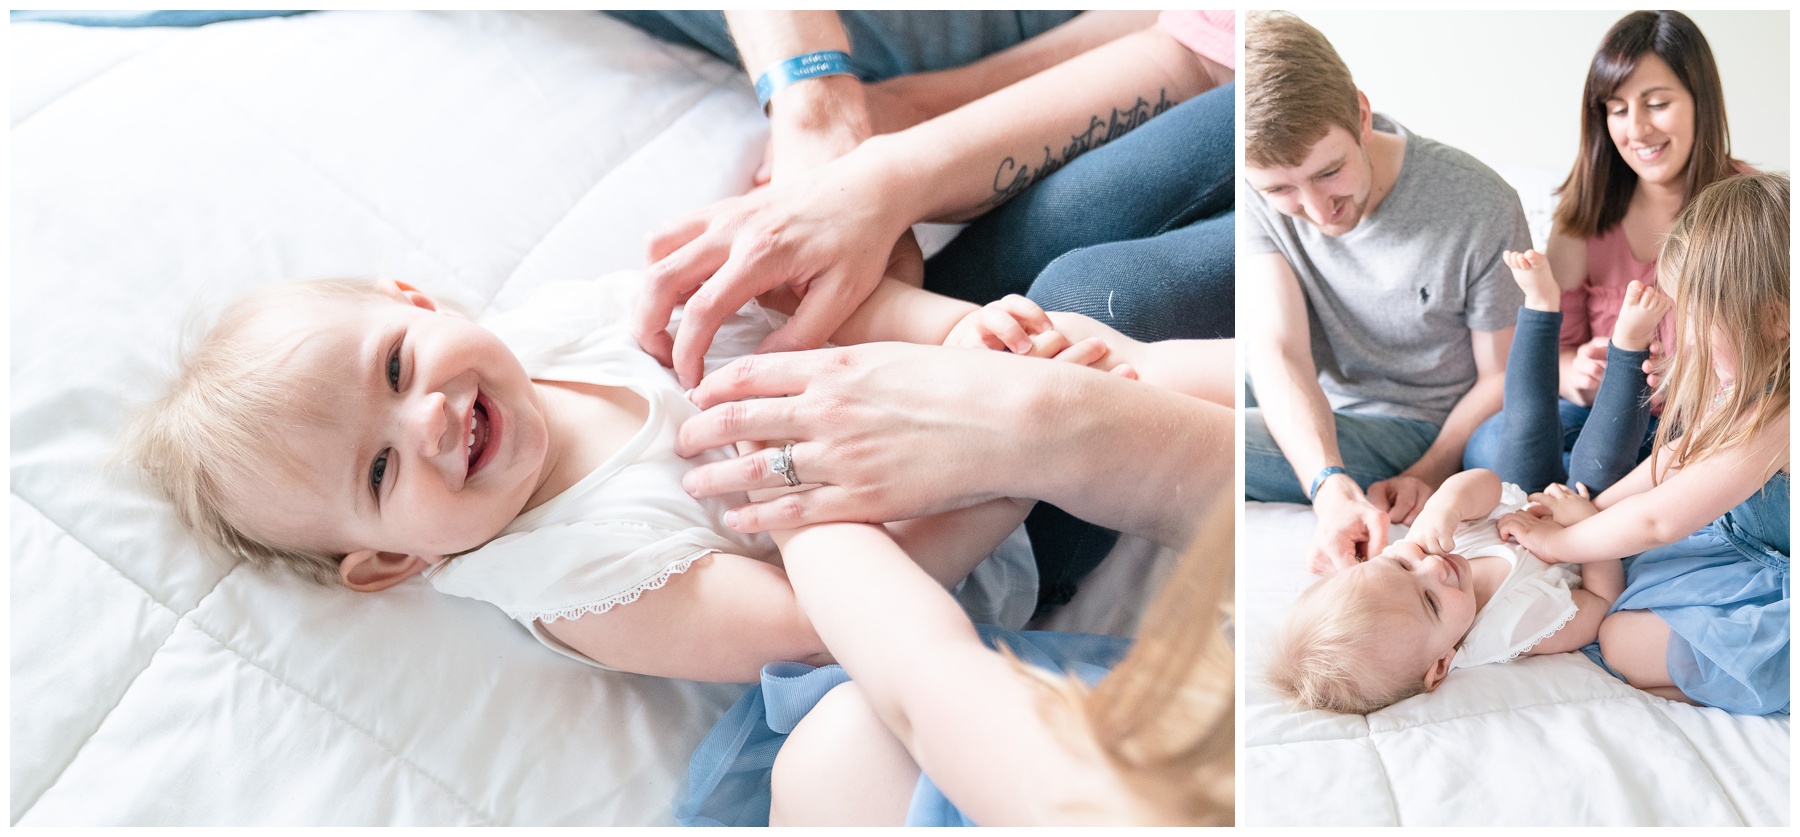 Tickling on the bed - Lifestyle Family Session